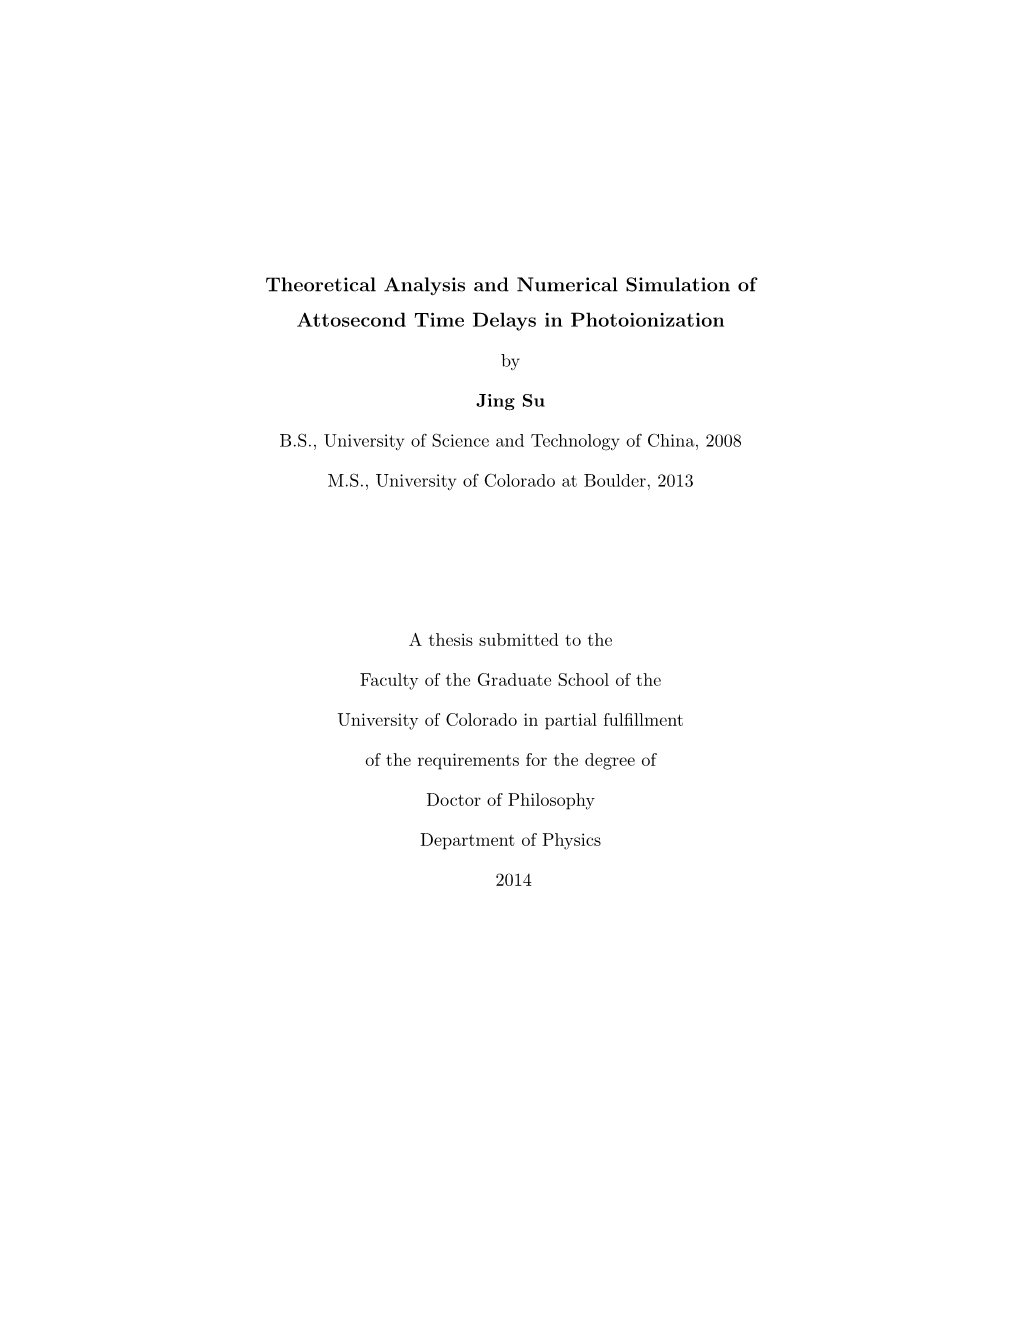 Theoretical Analysis and Numerical Simulation of Attosecond Time Delays in Photoionization